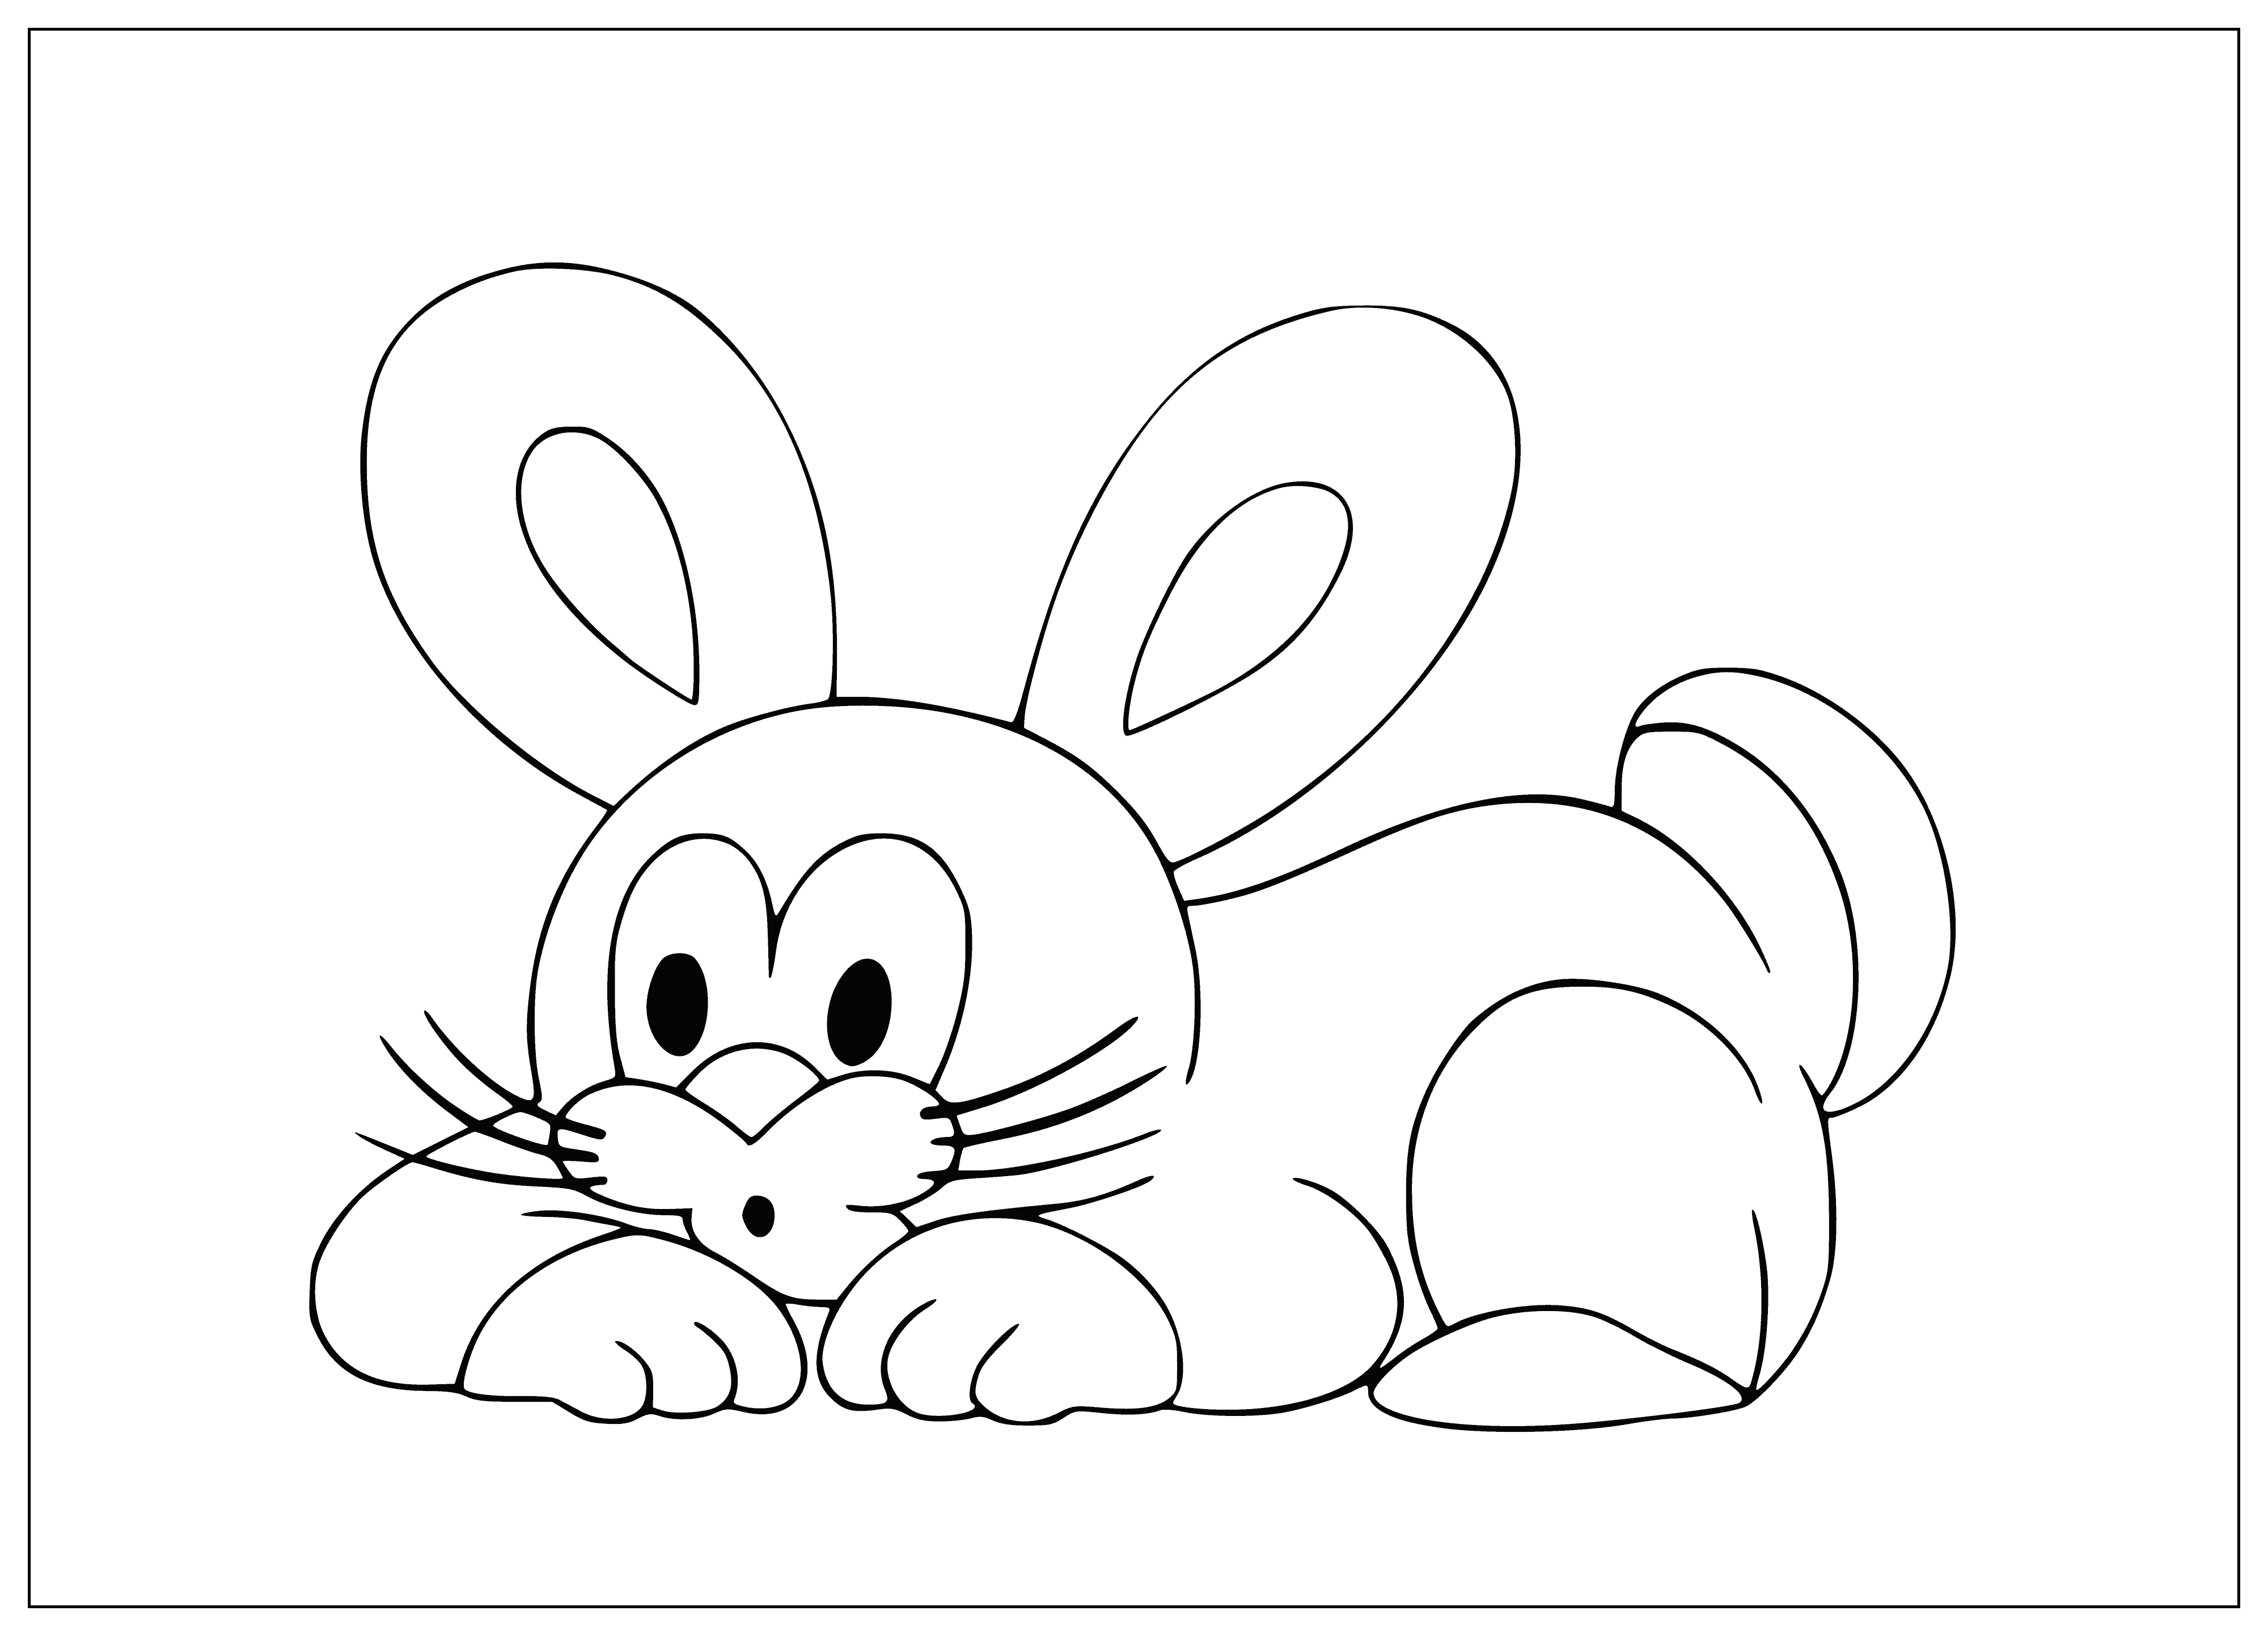 coloring page: Krtek-Rabbit is a cute brown and white rabbit w/long ears, a short tail, black eyes, and a brown nose sitting on hind legs.